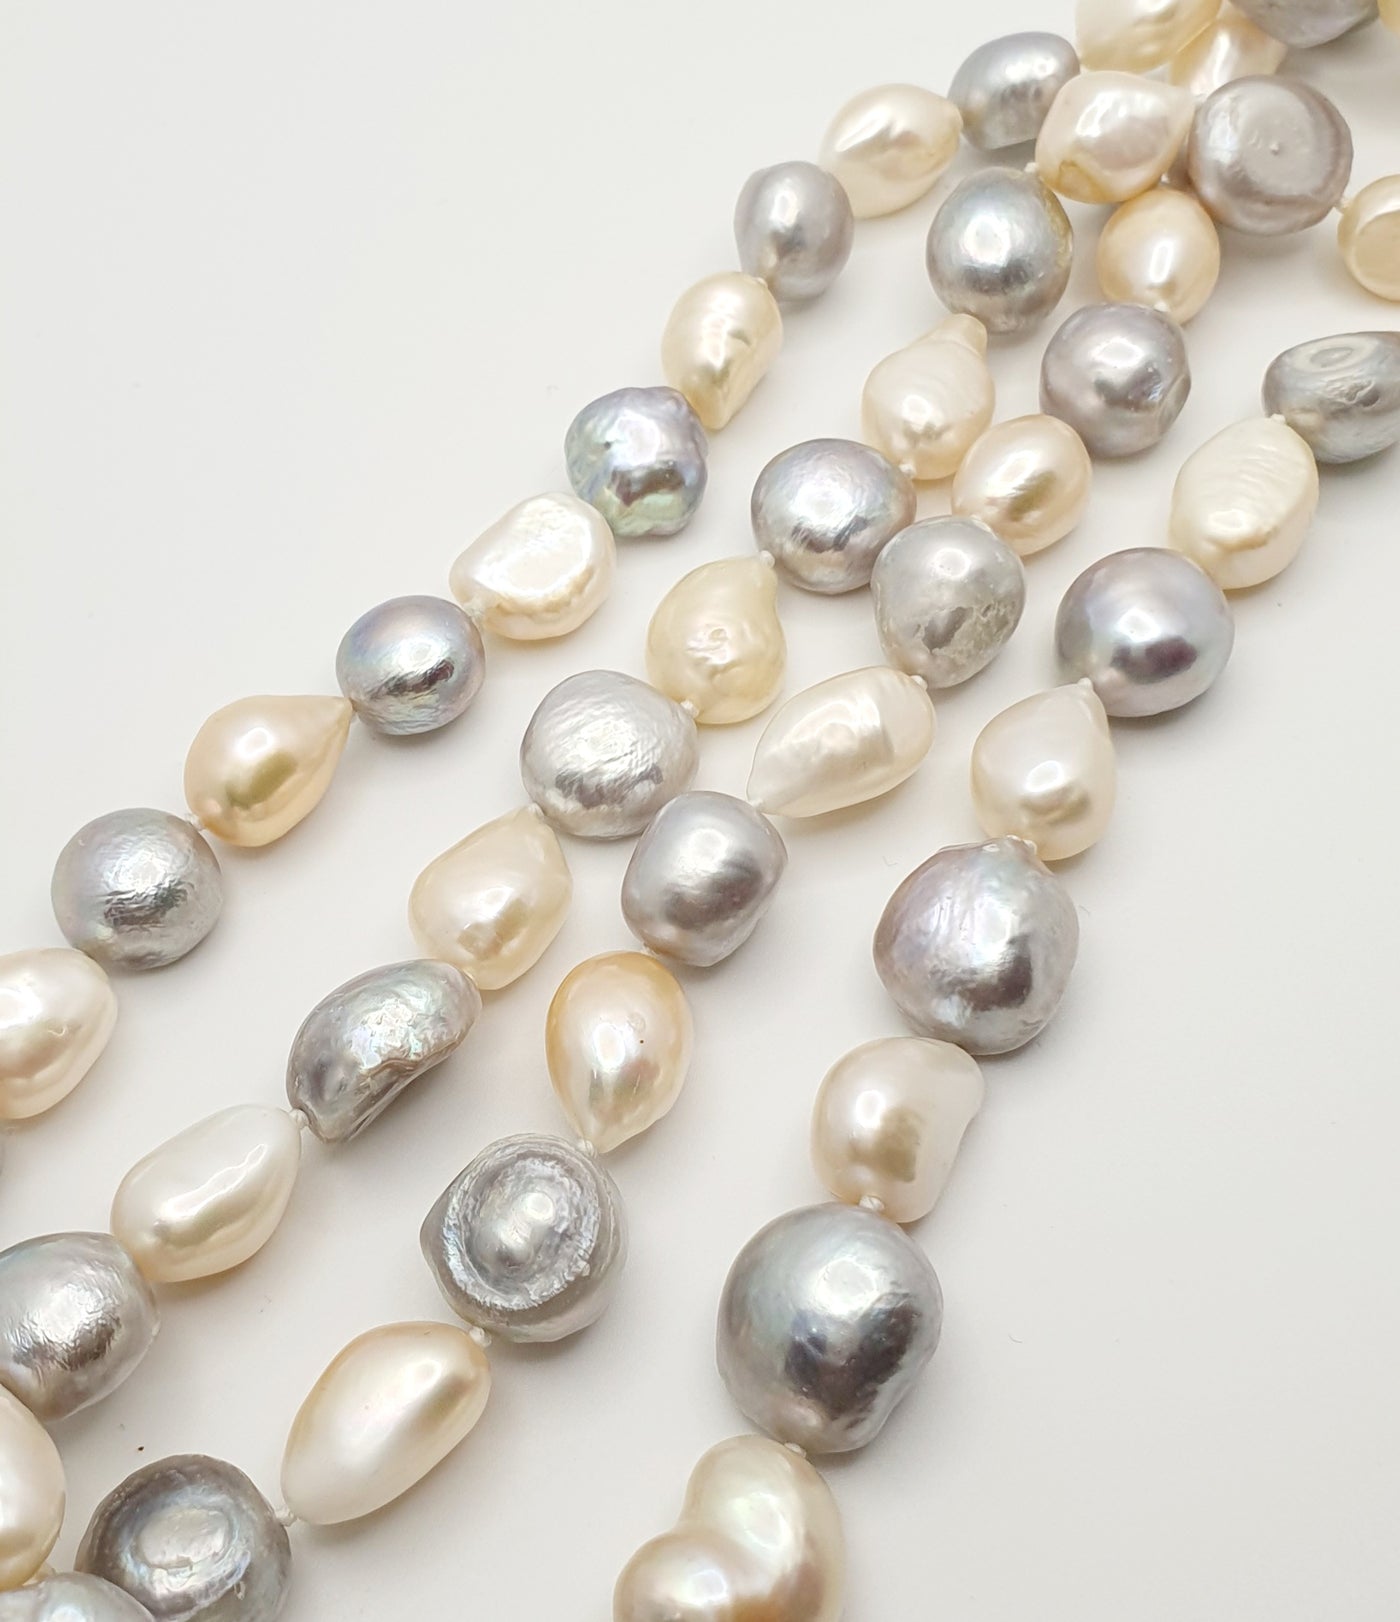 Combination of Large Dyed Freshwater Pearls Strand 87.5cm